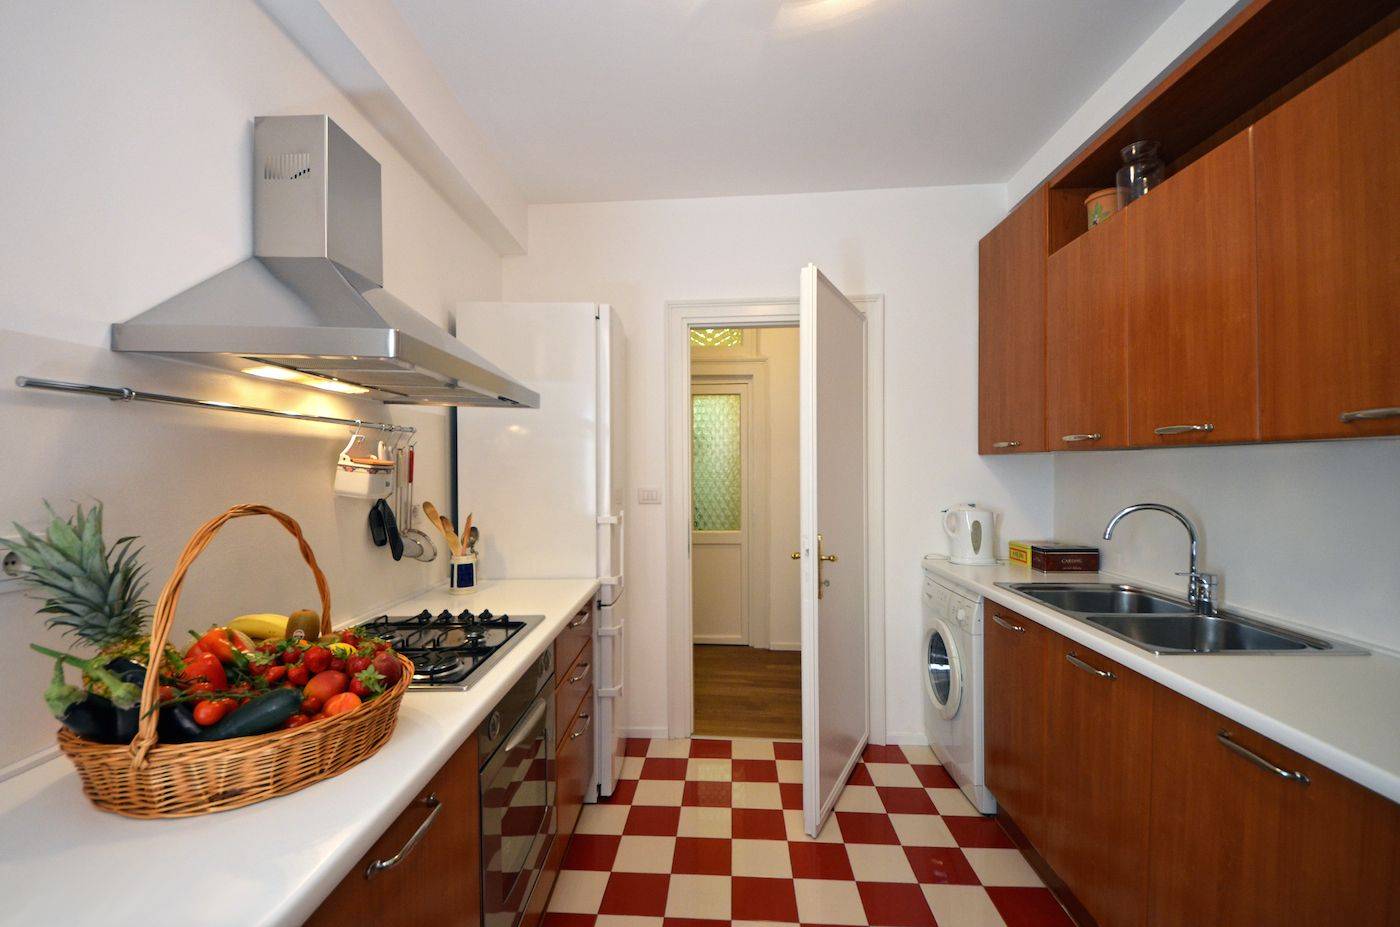 the kitchen has been recently renovated and equipped with new appliances